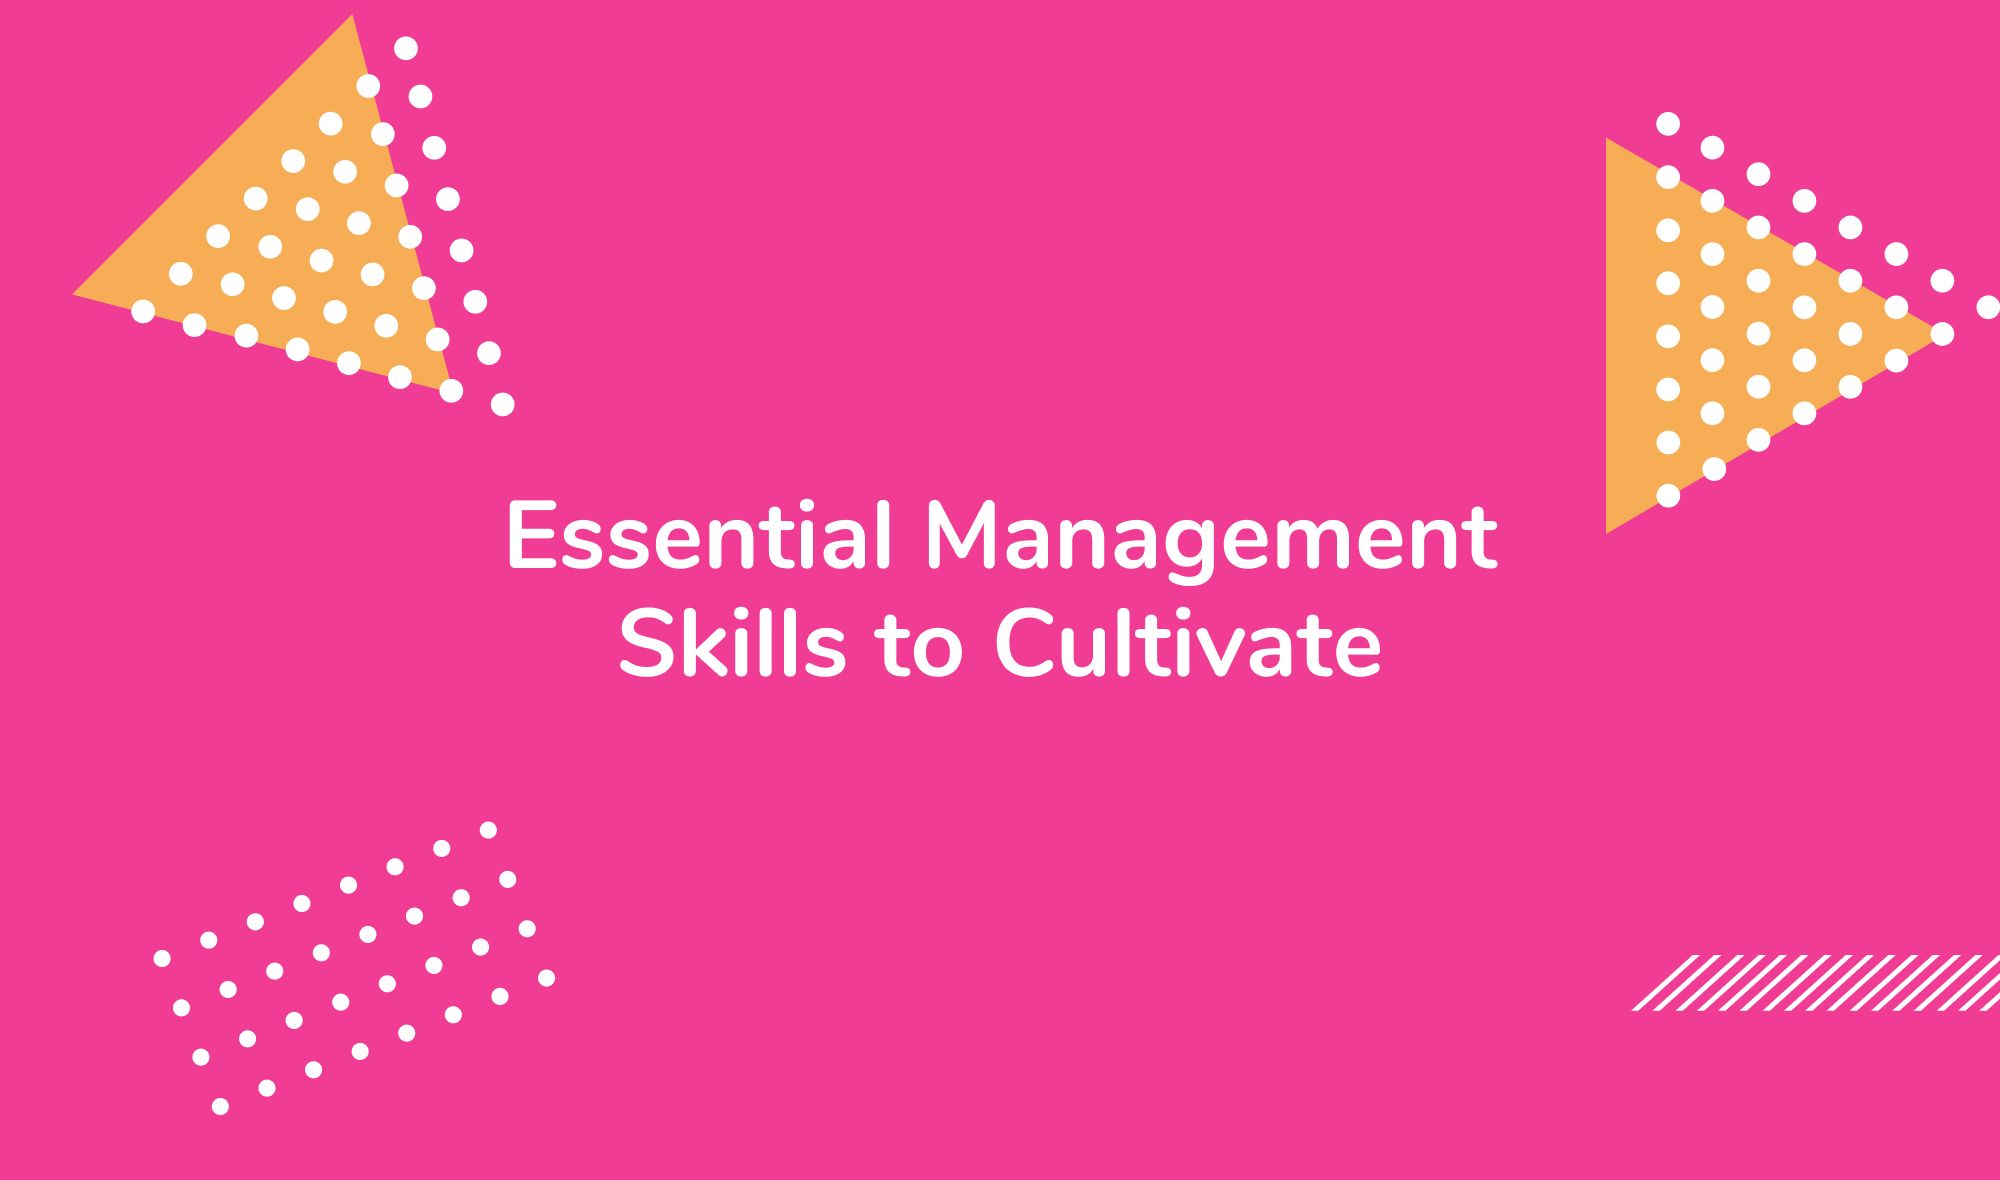 Essential Management Skills to Cultivate